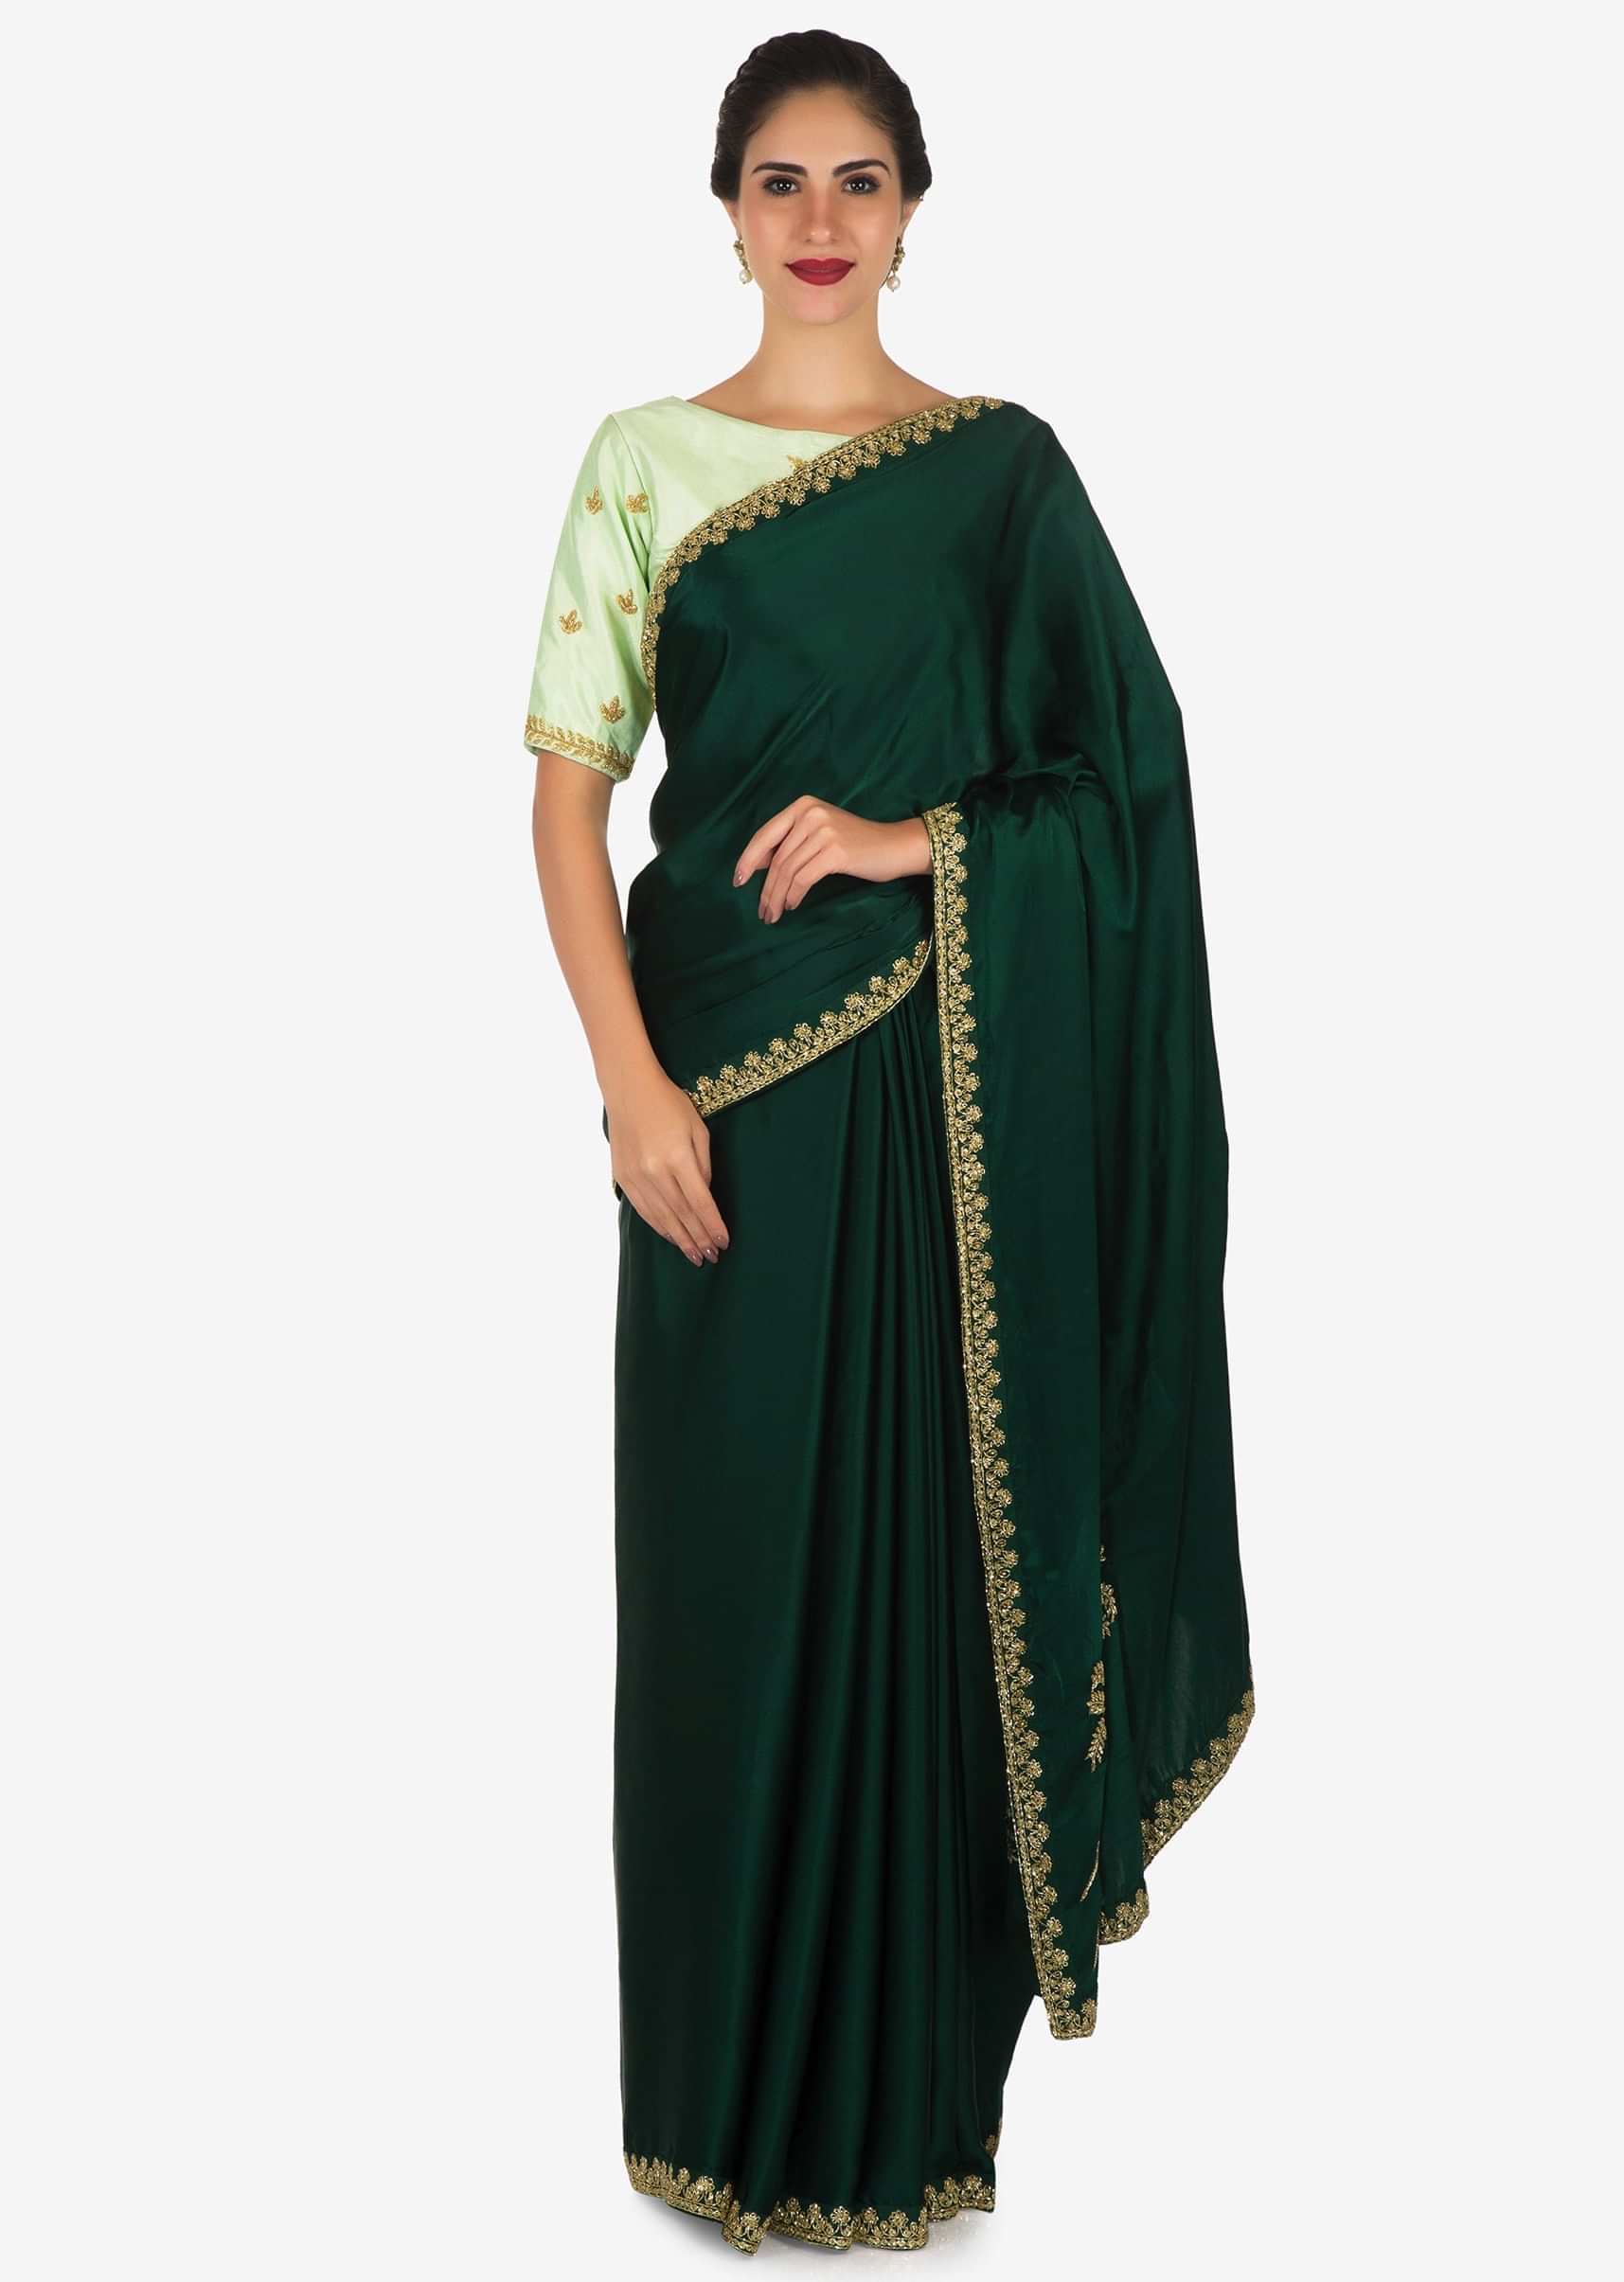 Bottle Green Saree With Mustard Blouse Carved In Heavy Cut Dana Embroidery Work Online - Kalki Fashion